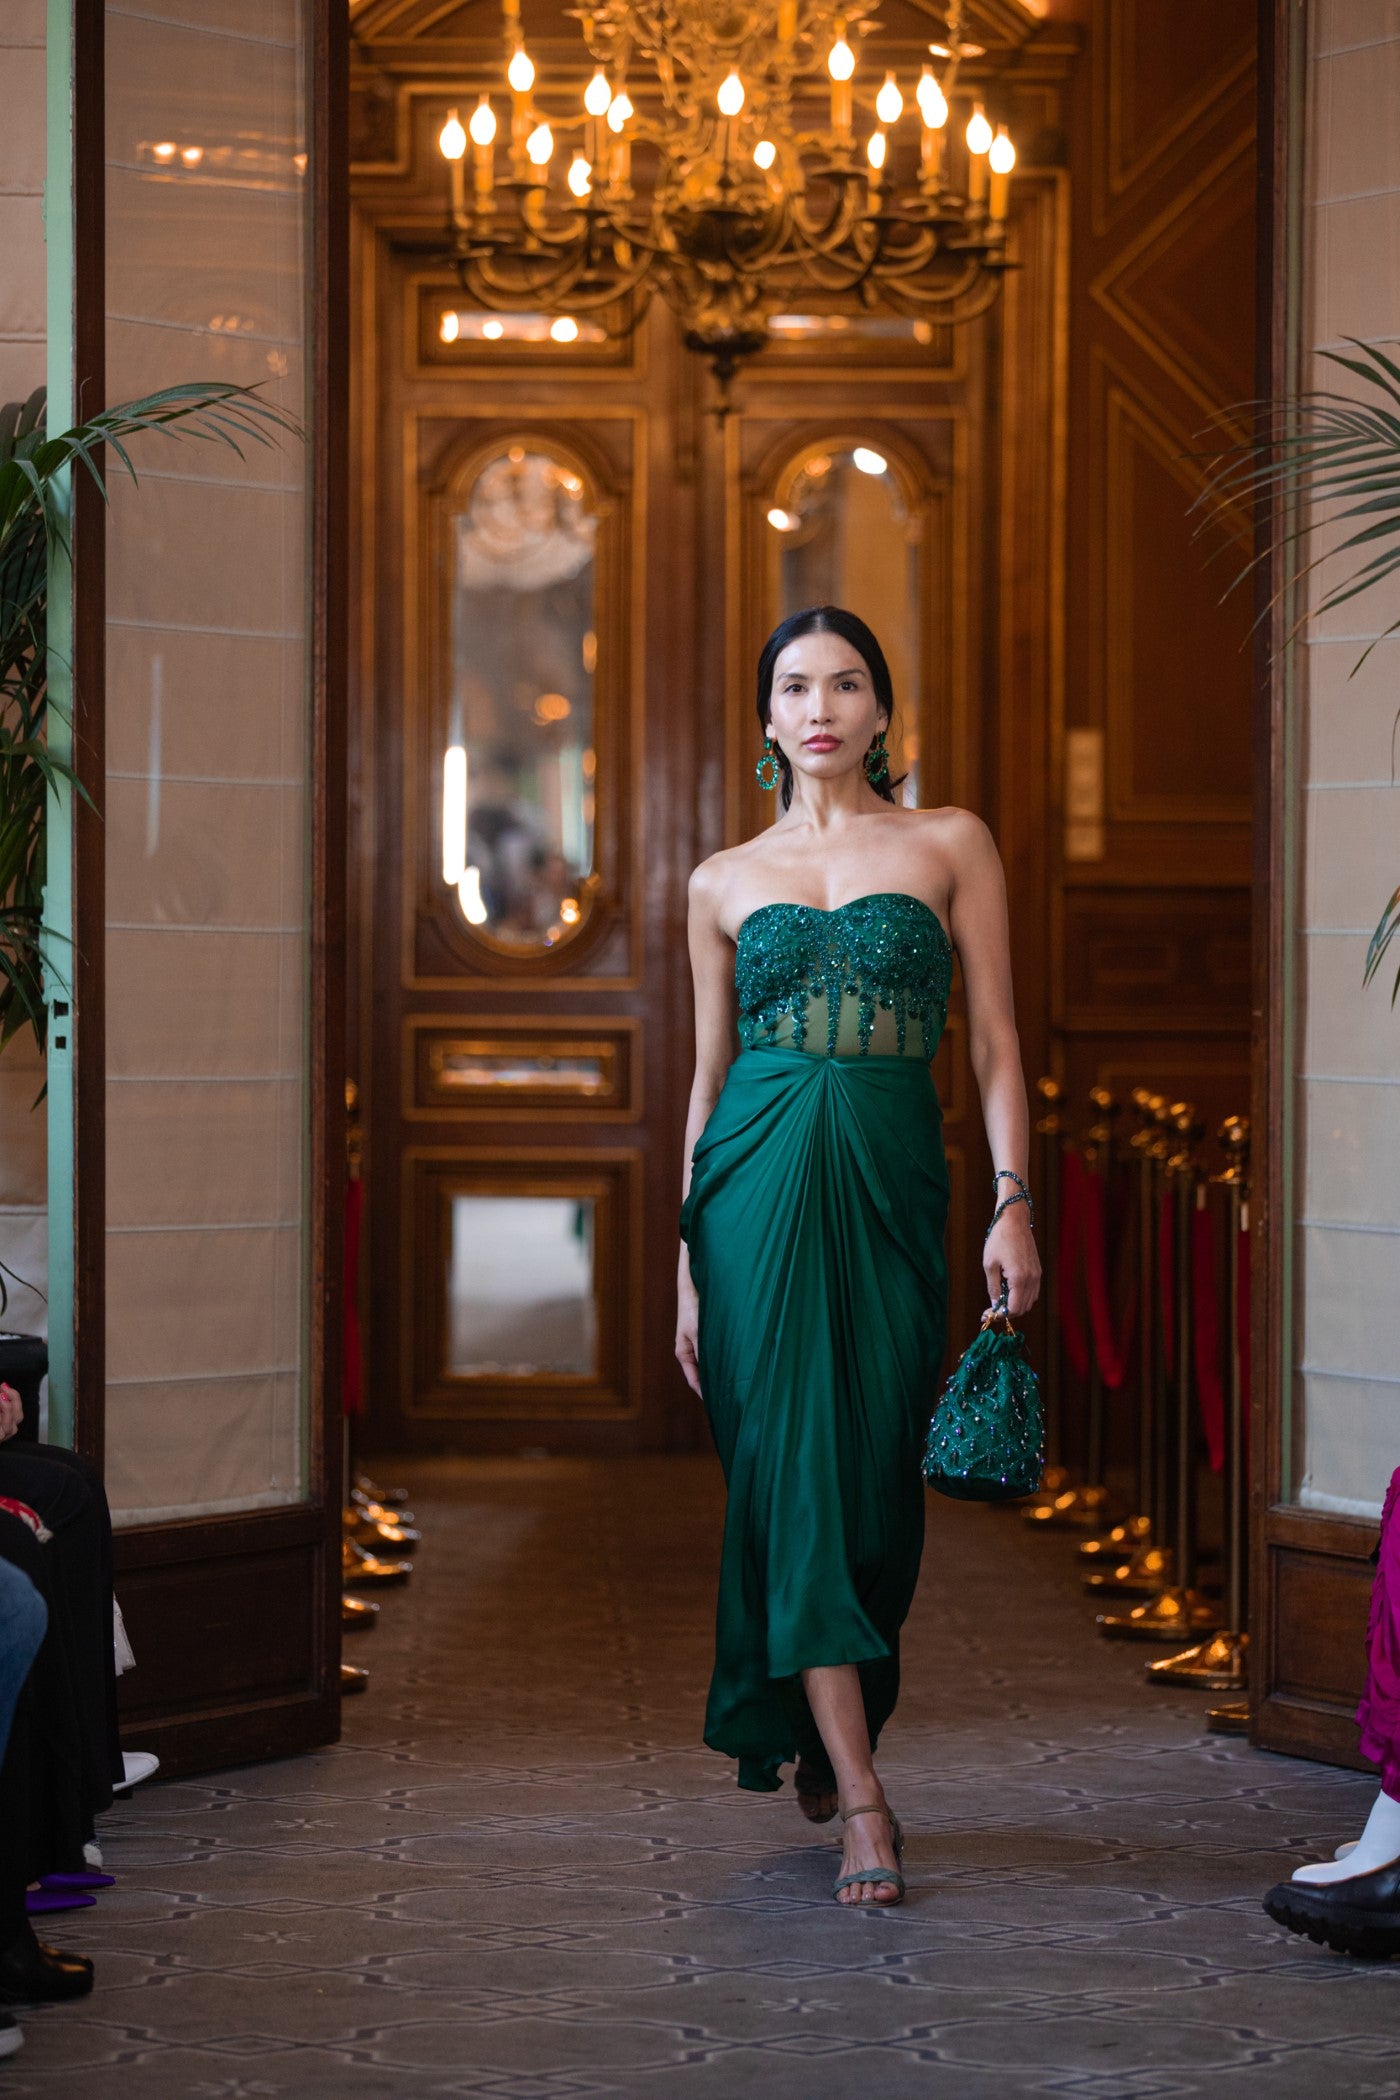 Green pre-draped gown